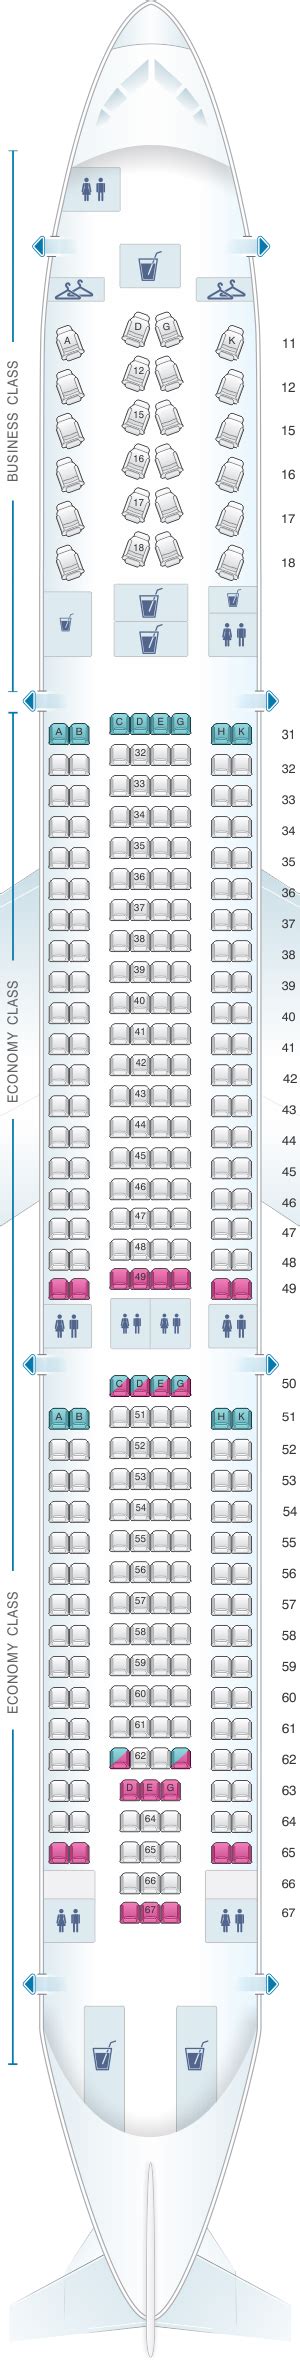 Seat Map Hainan Airlines Airbus A330 300 Config2 Seatmaestro